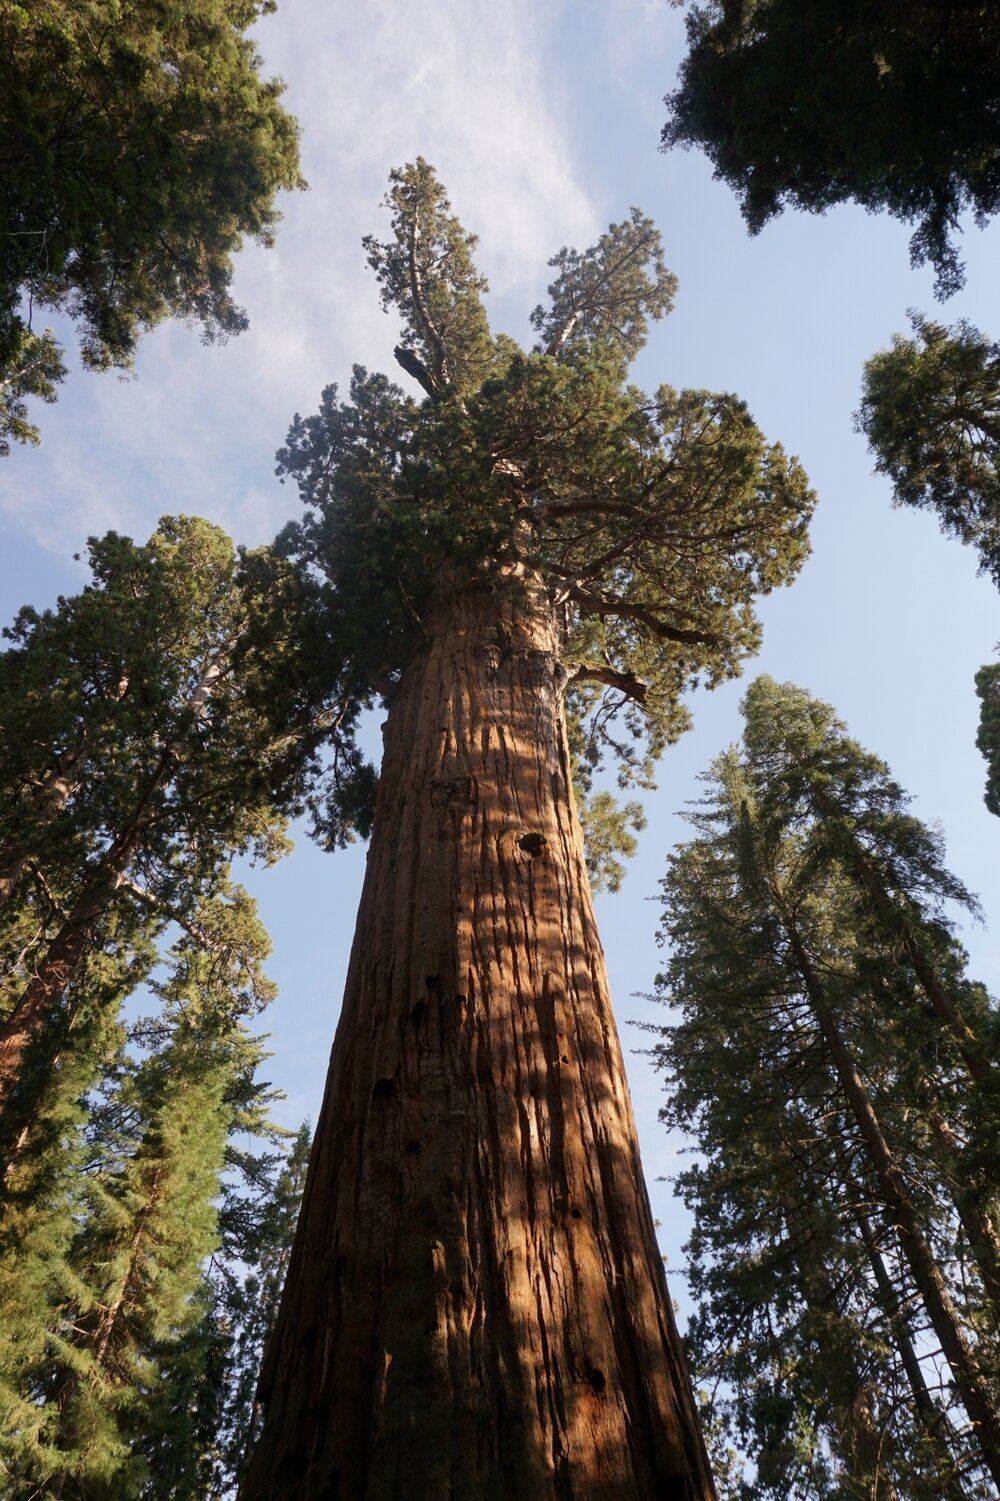 General Sherman tree body, looking up at sky - Sequoia National Park